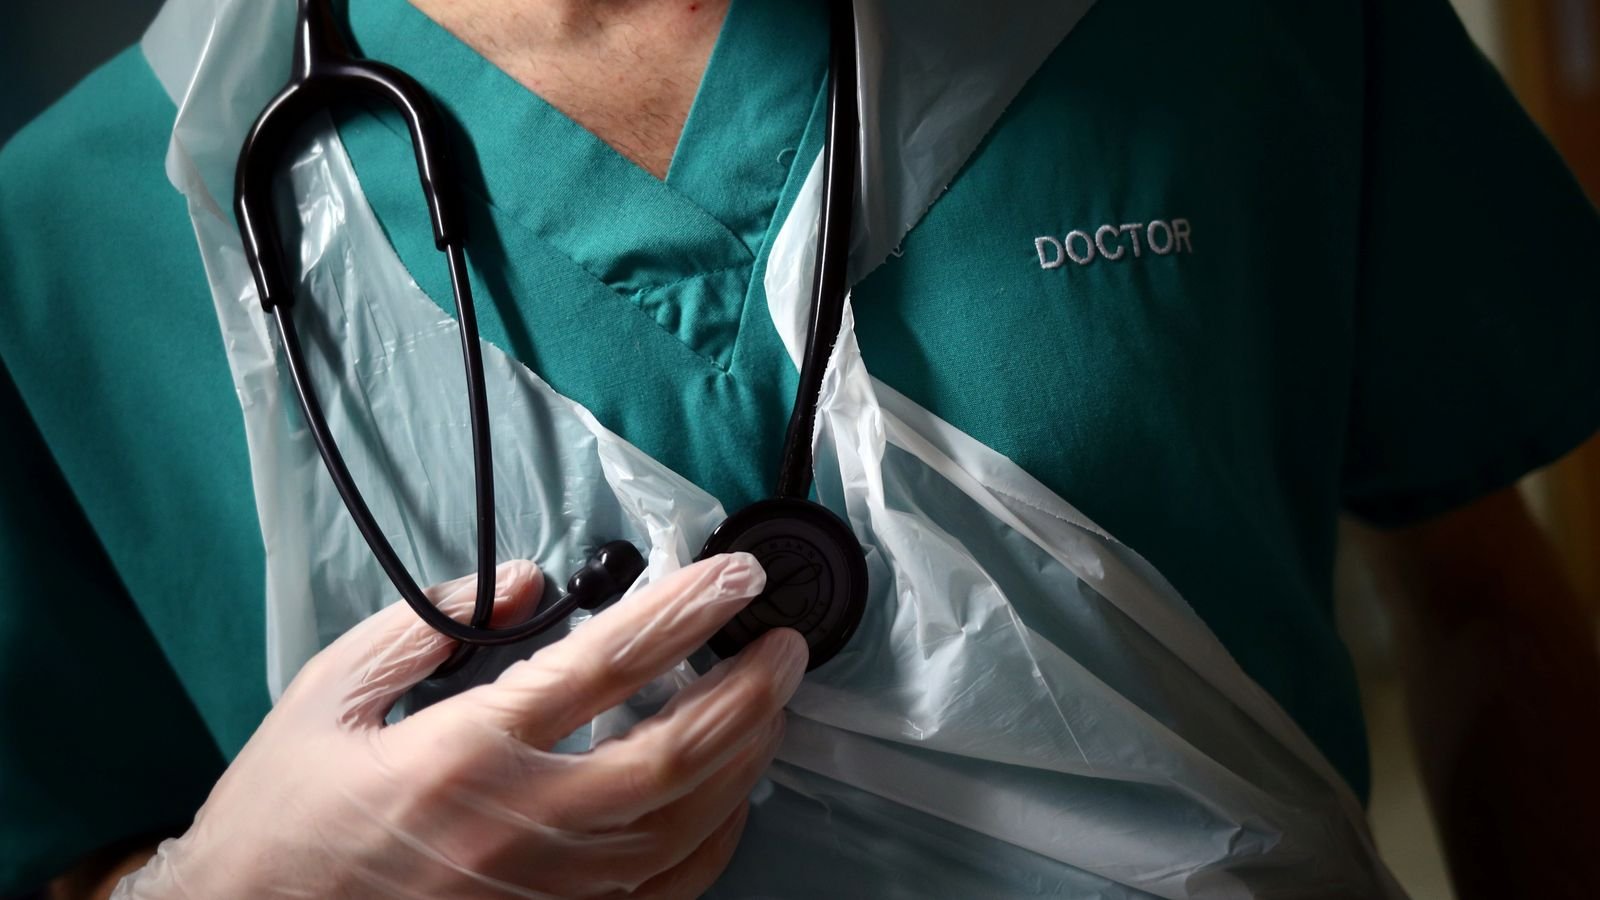 Junior doctors' strike: What to do if you need NHS care during 'longest ever' walkout